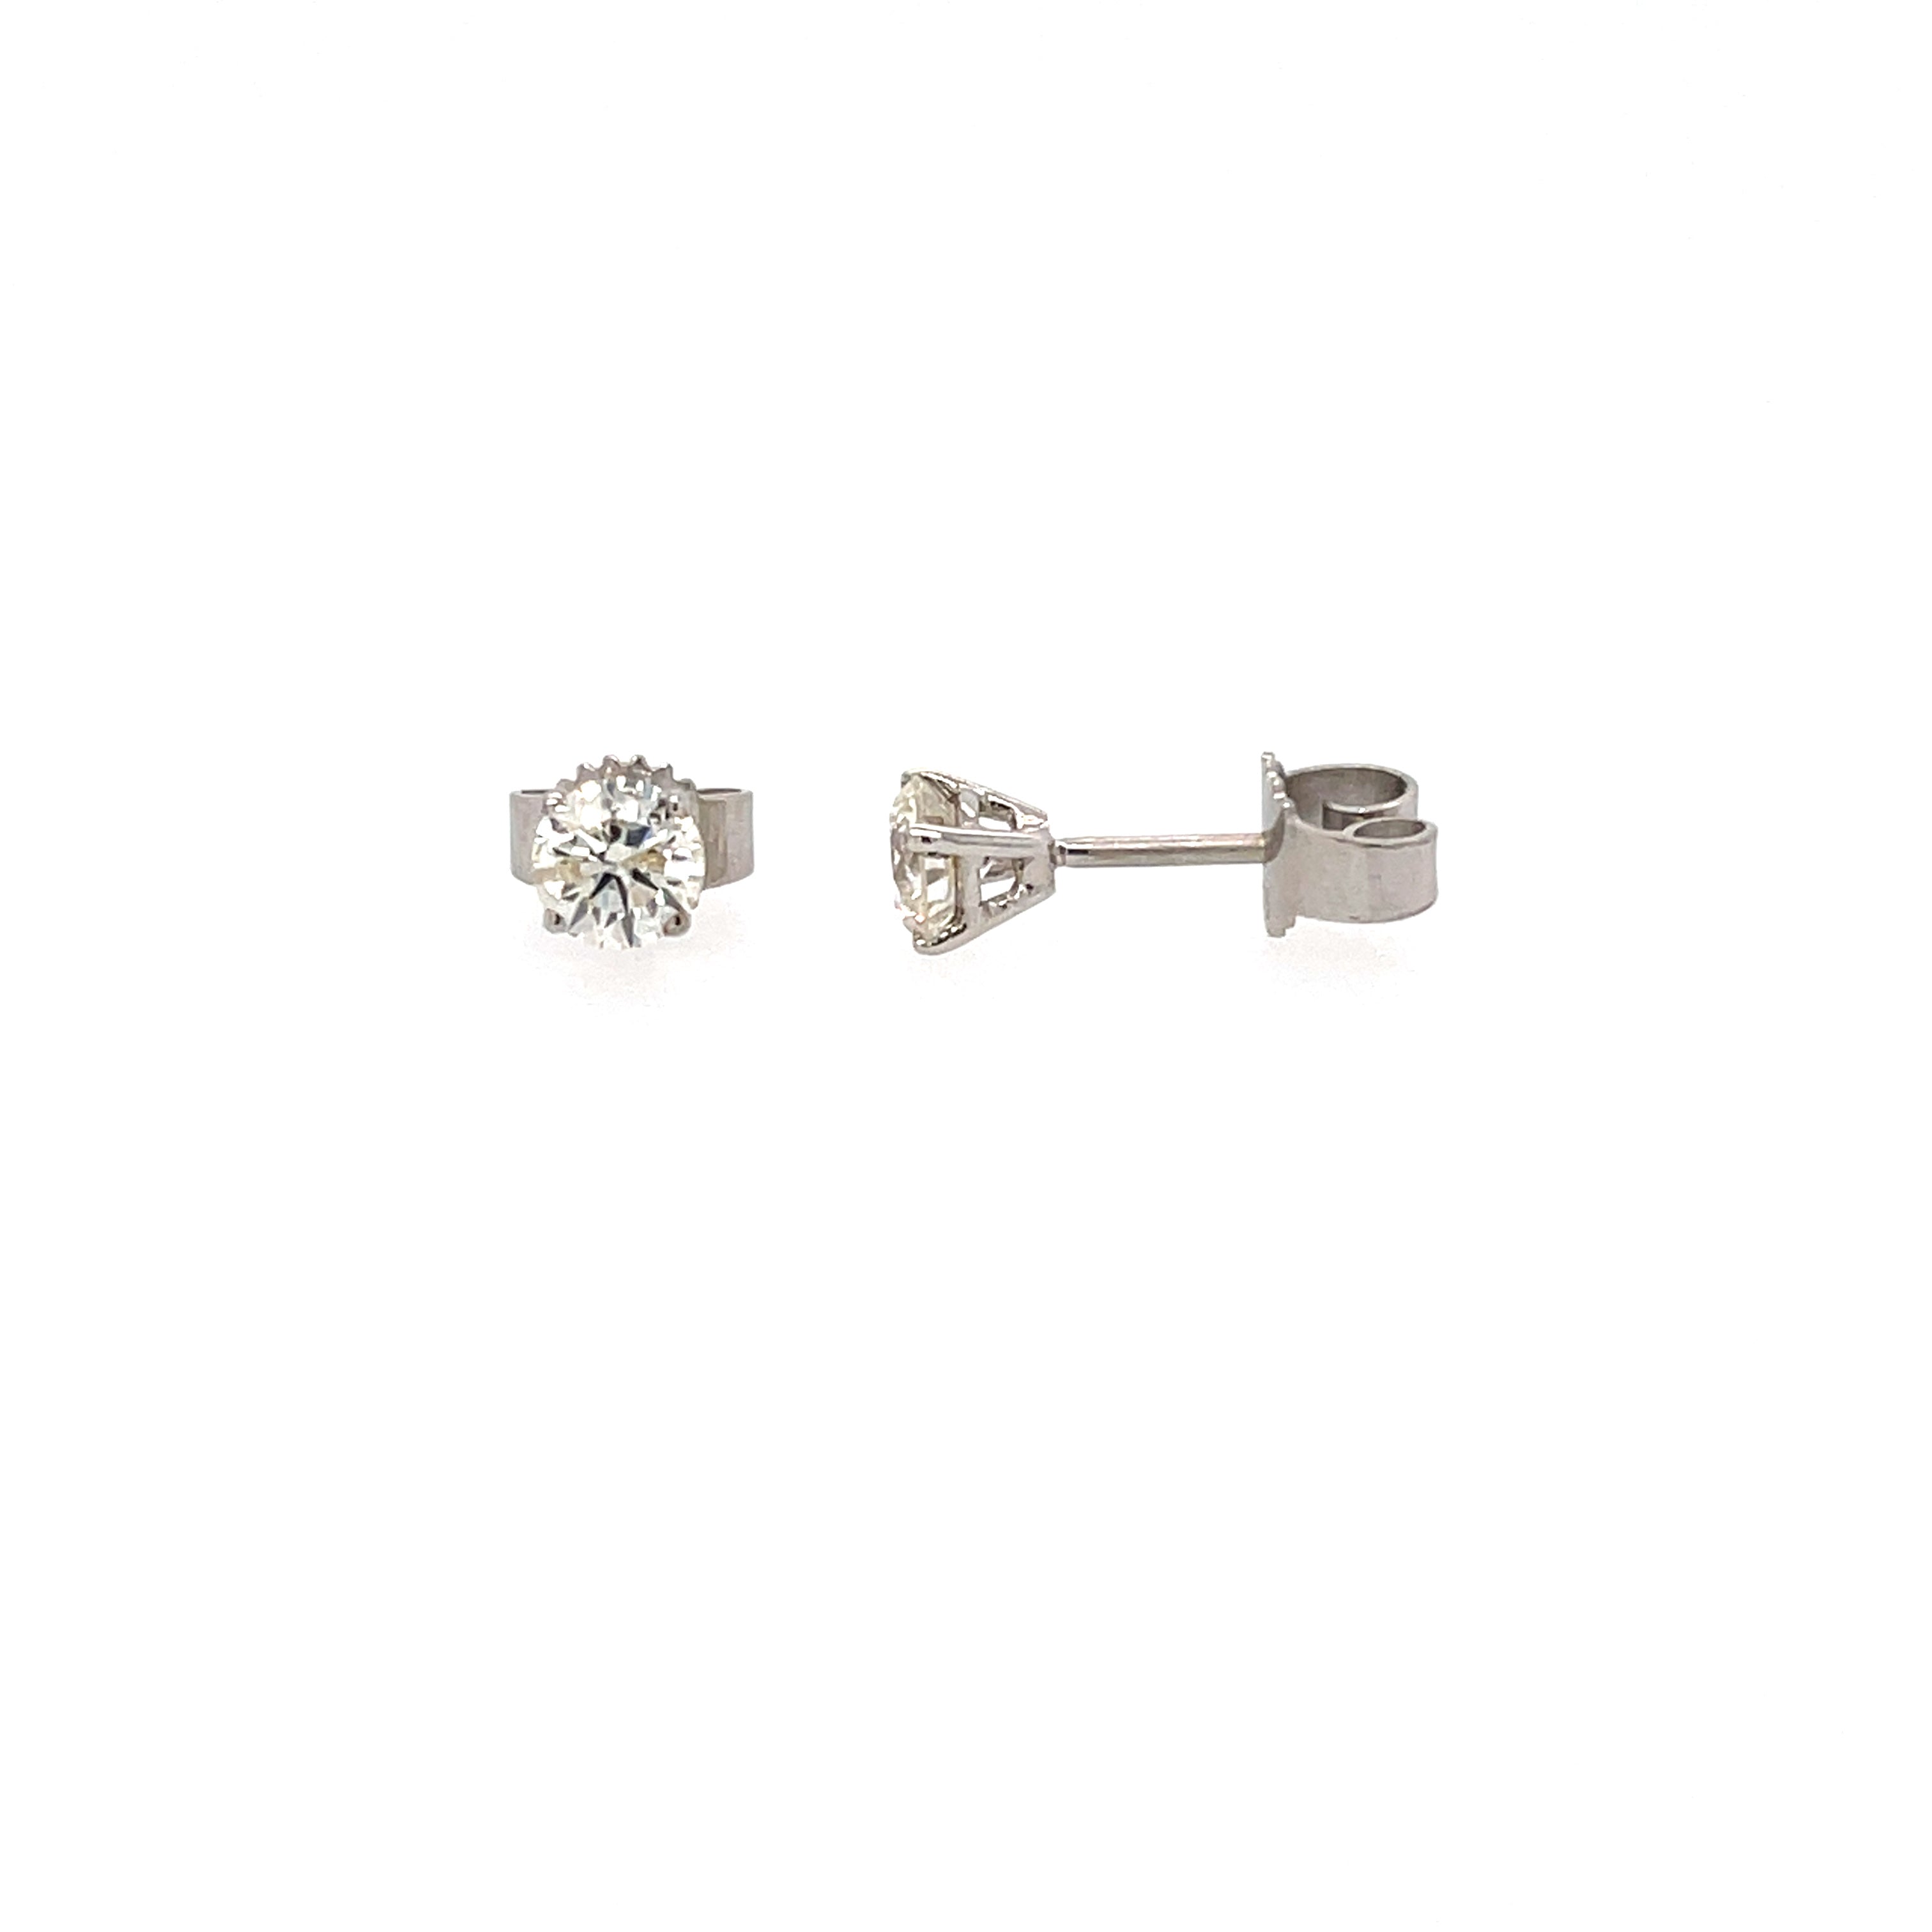 0.66ct Diamond Solitaire Stud Earrings 9ct White Gold SOLD